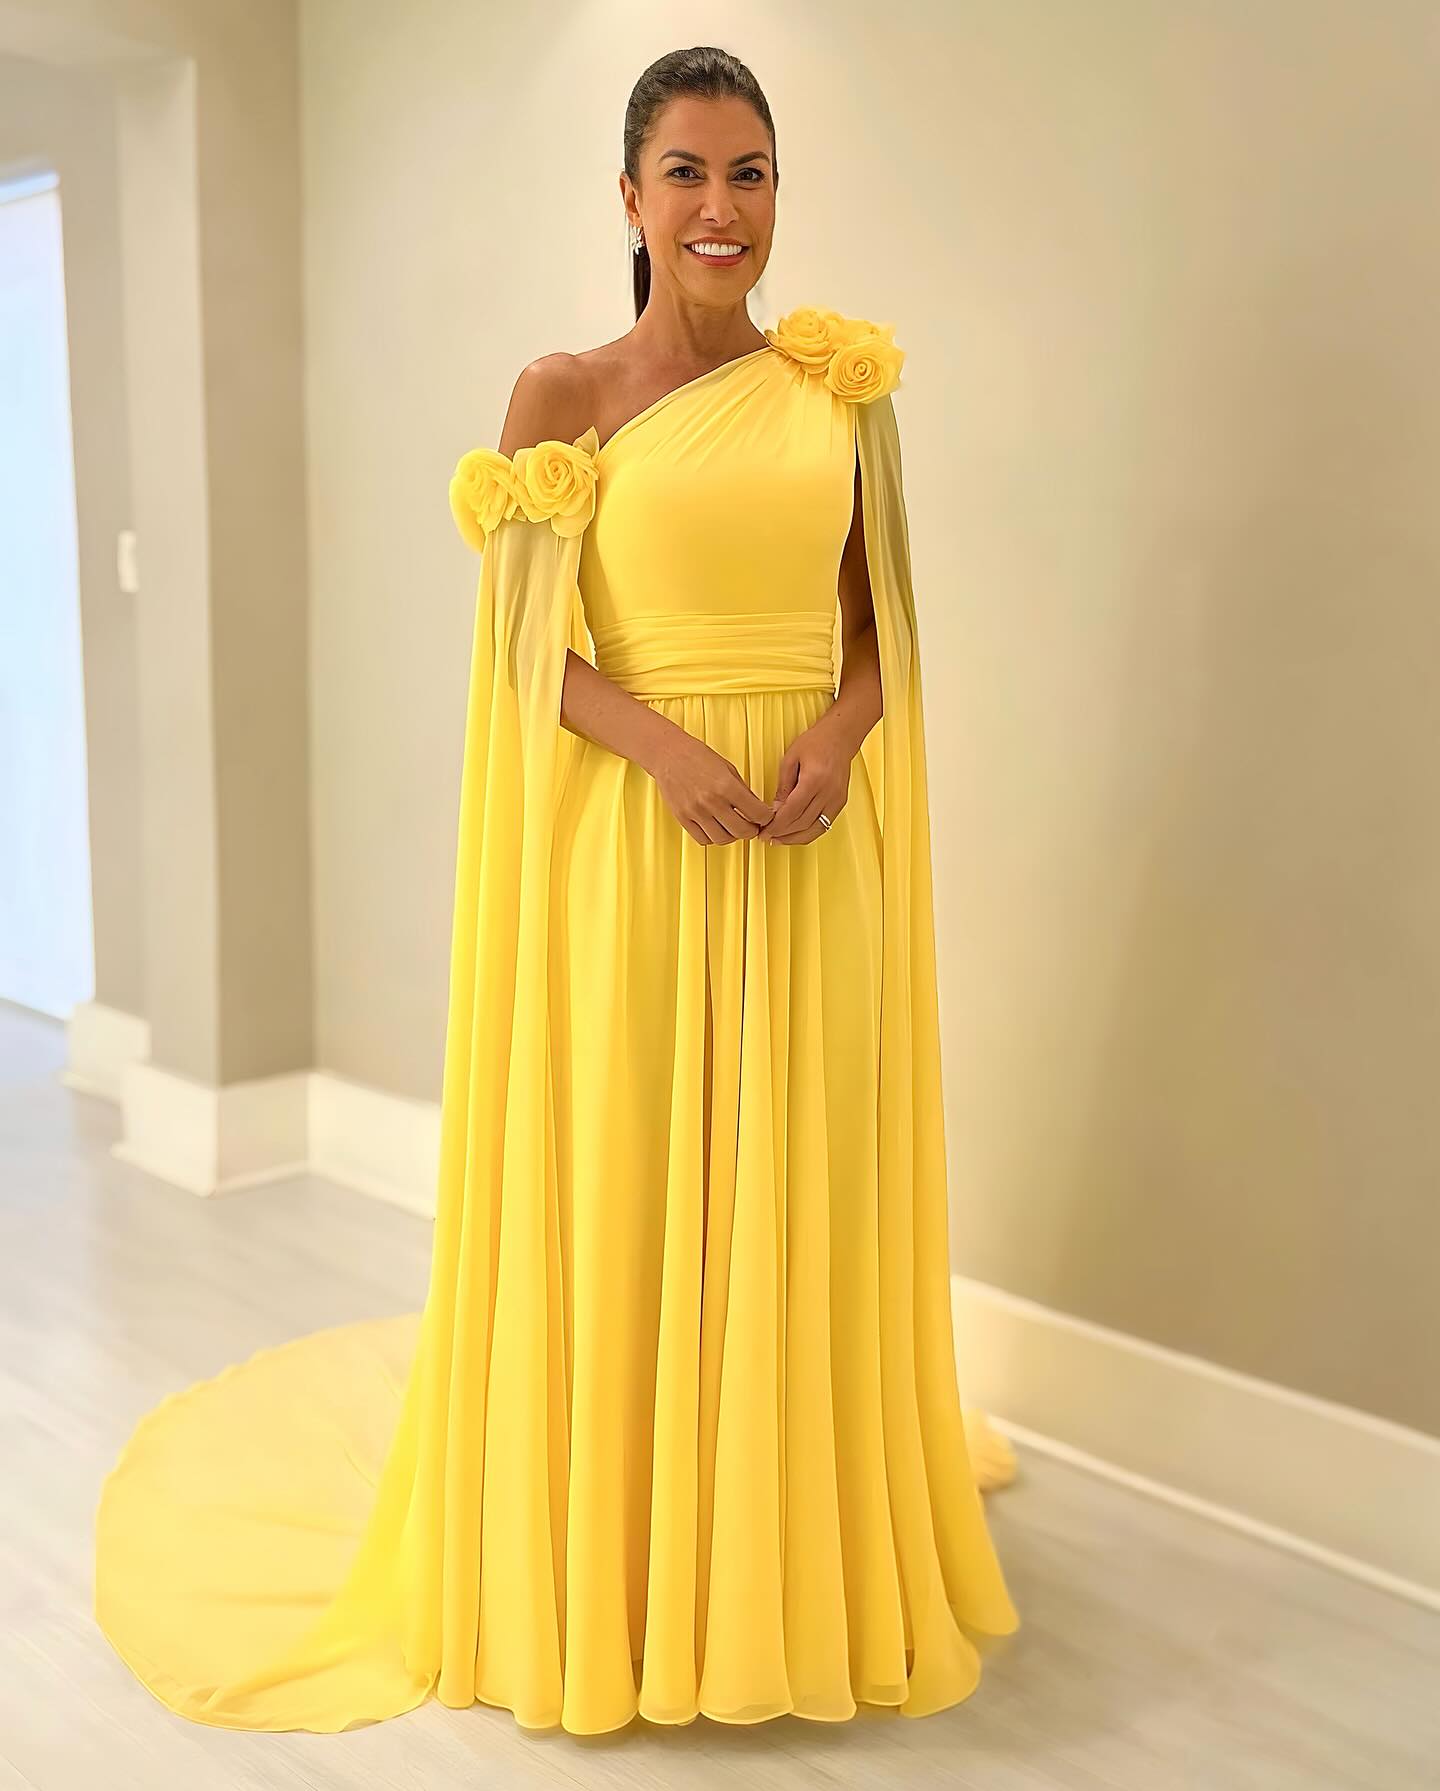 Elegant yellow Mother Of The Bride Dresses floral appliqued shoulder Wedding Guest Dress ruffle floor length Evening Gowns